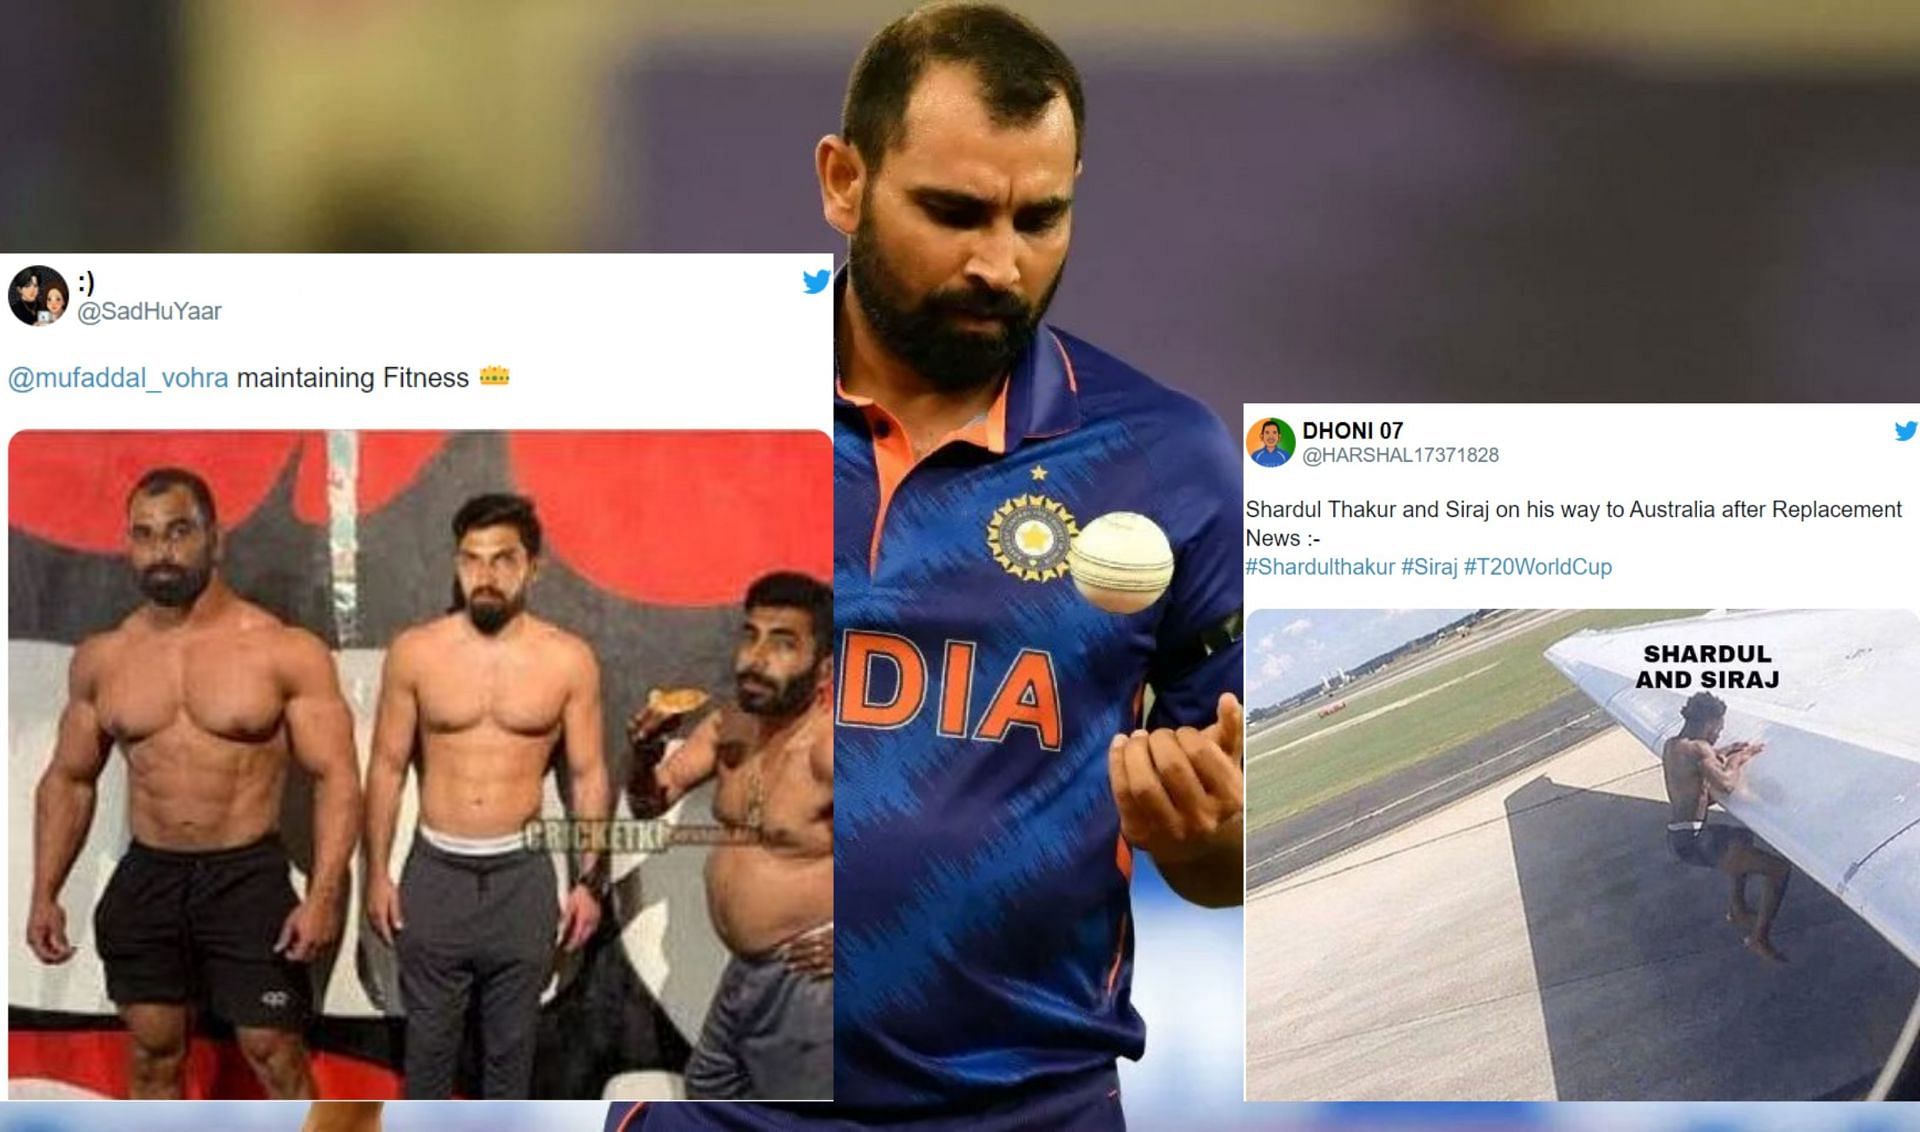 Fans react to Mohammed Shami